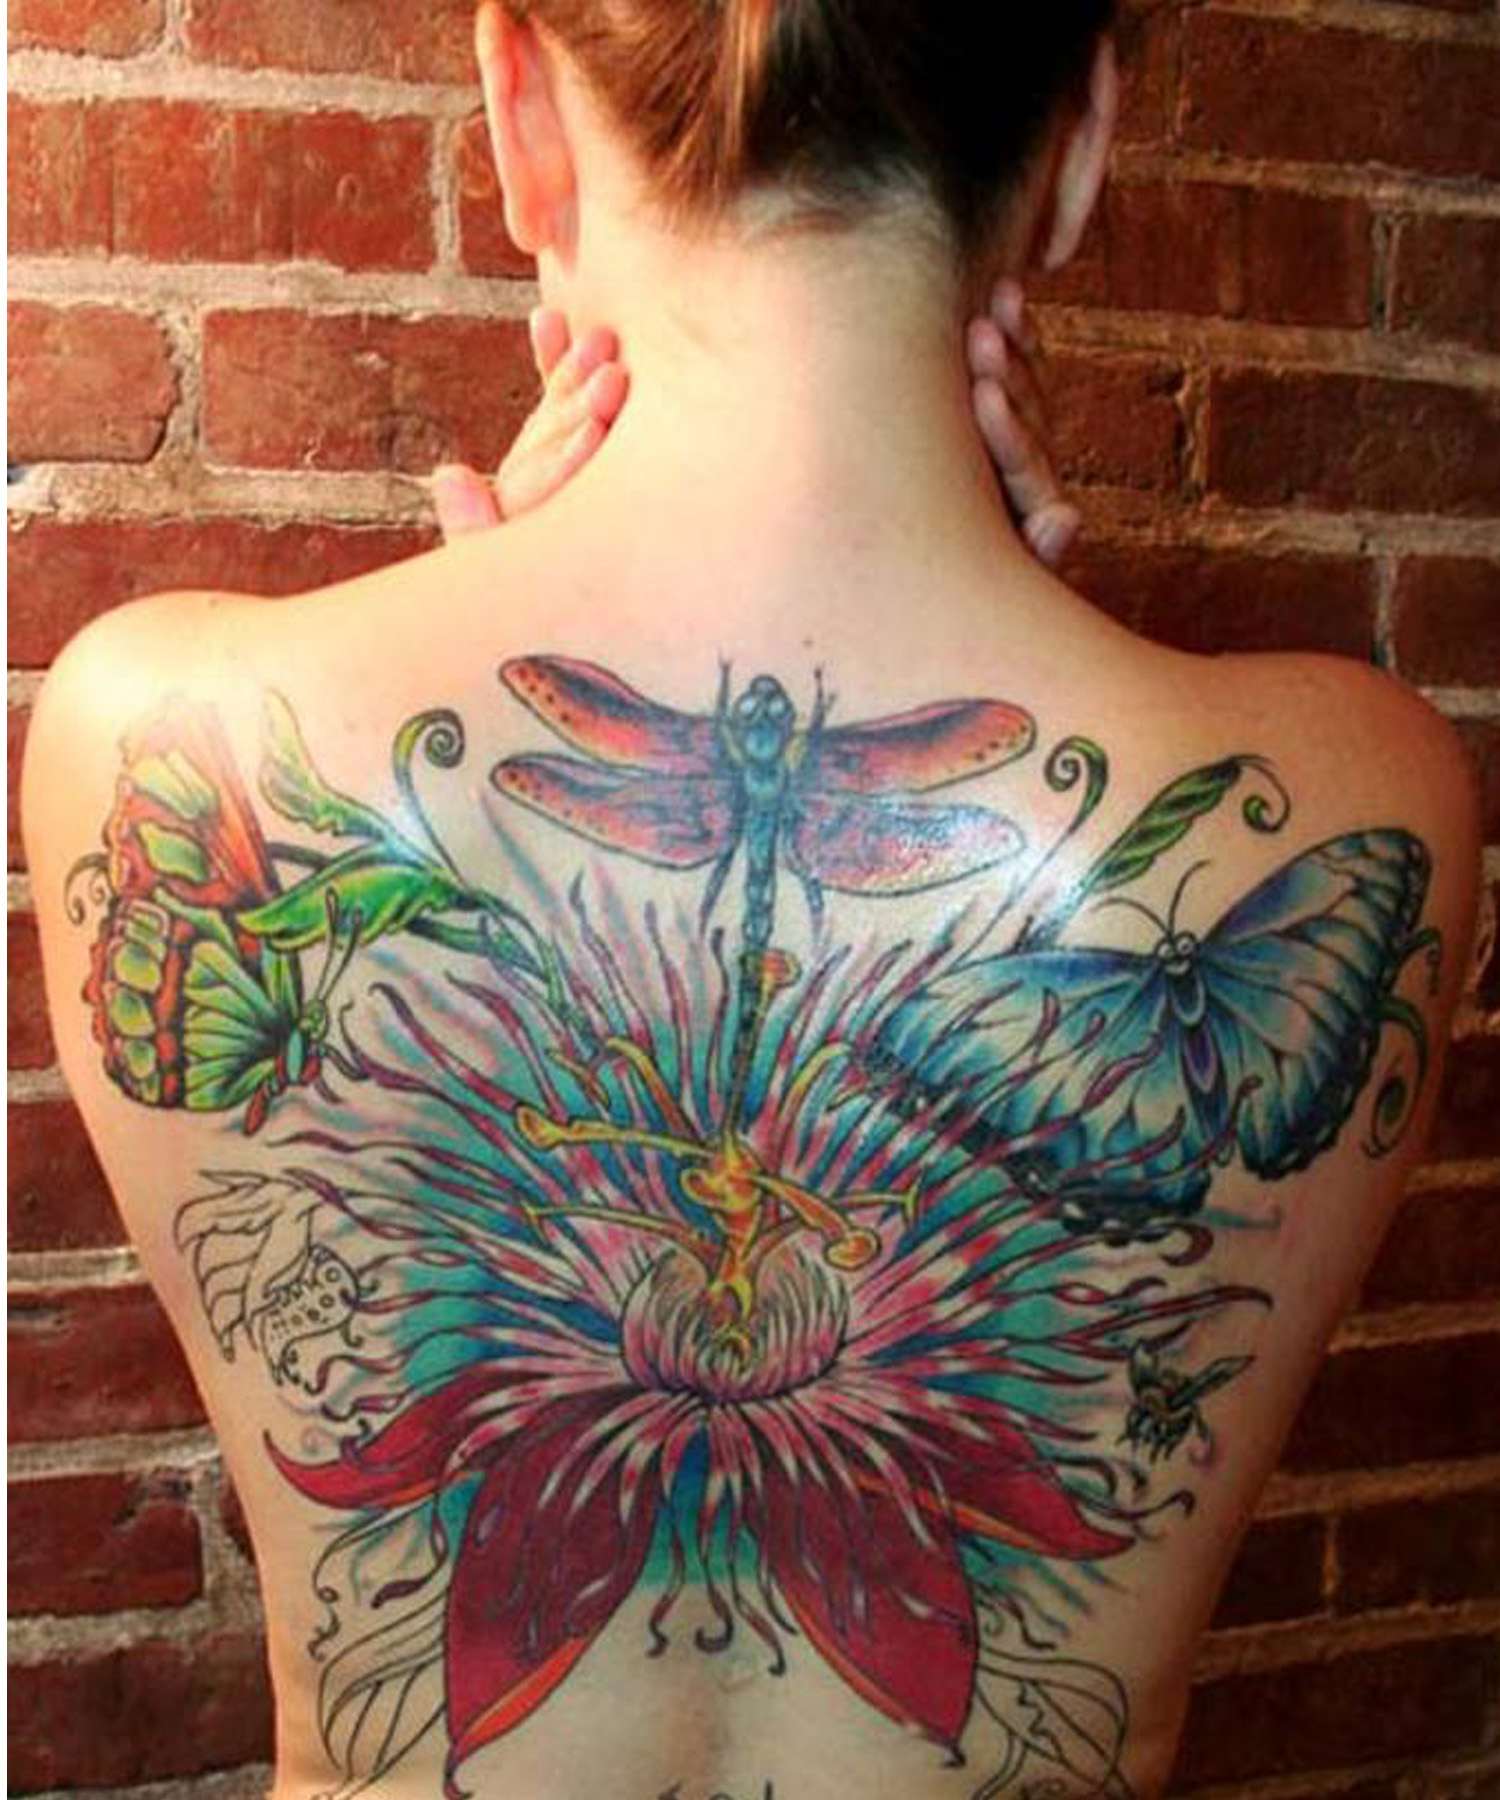 Butterfly flower tattoos are